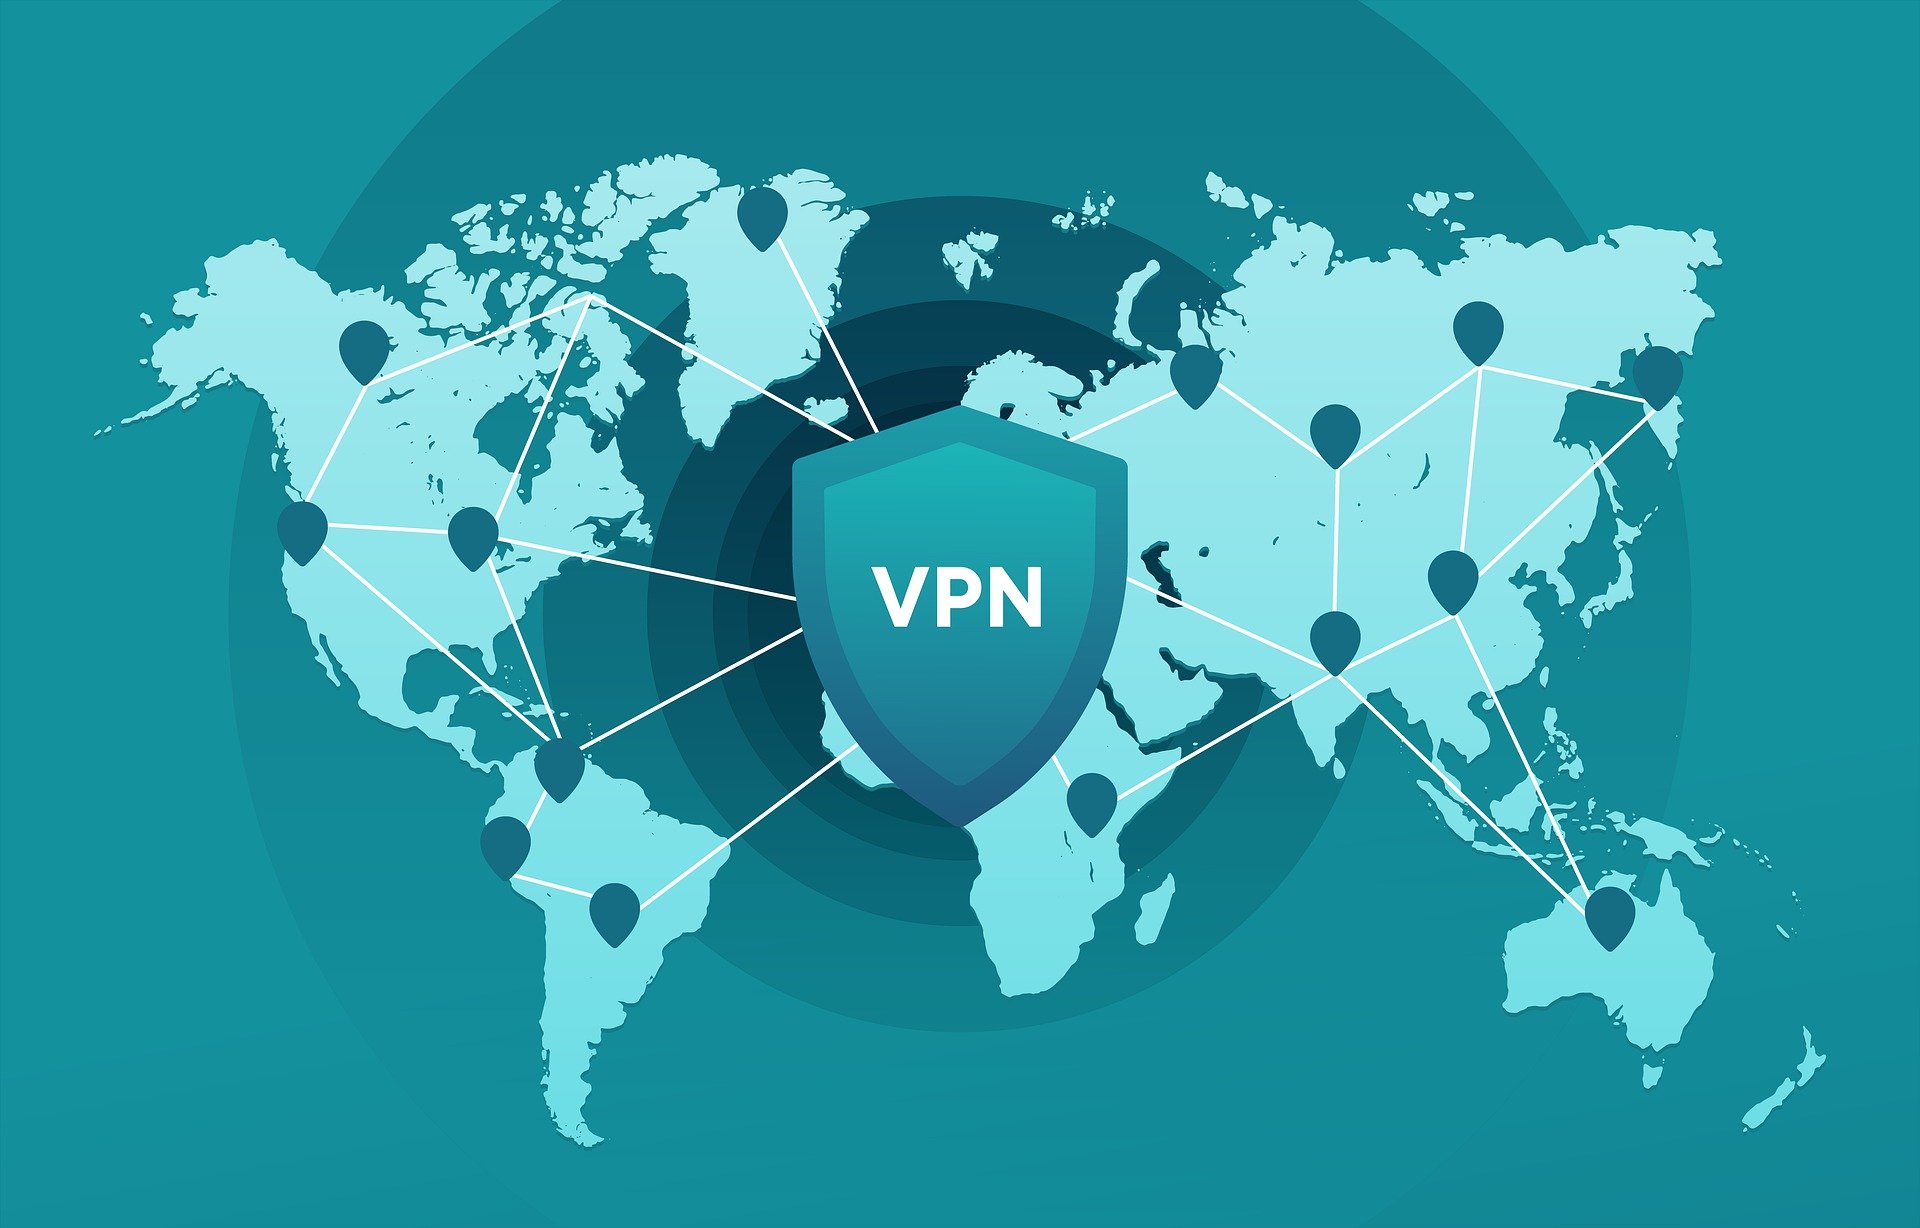 How To Protect Your Devices From Being Spied By Using VPN